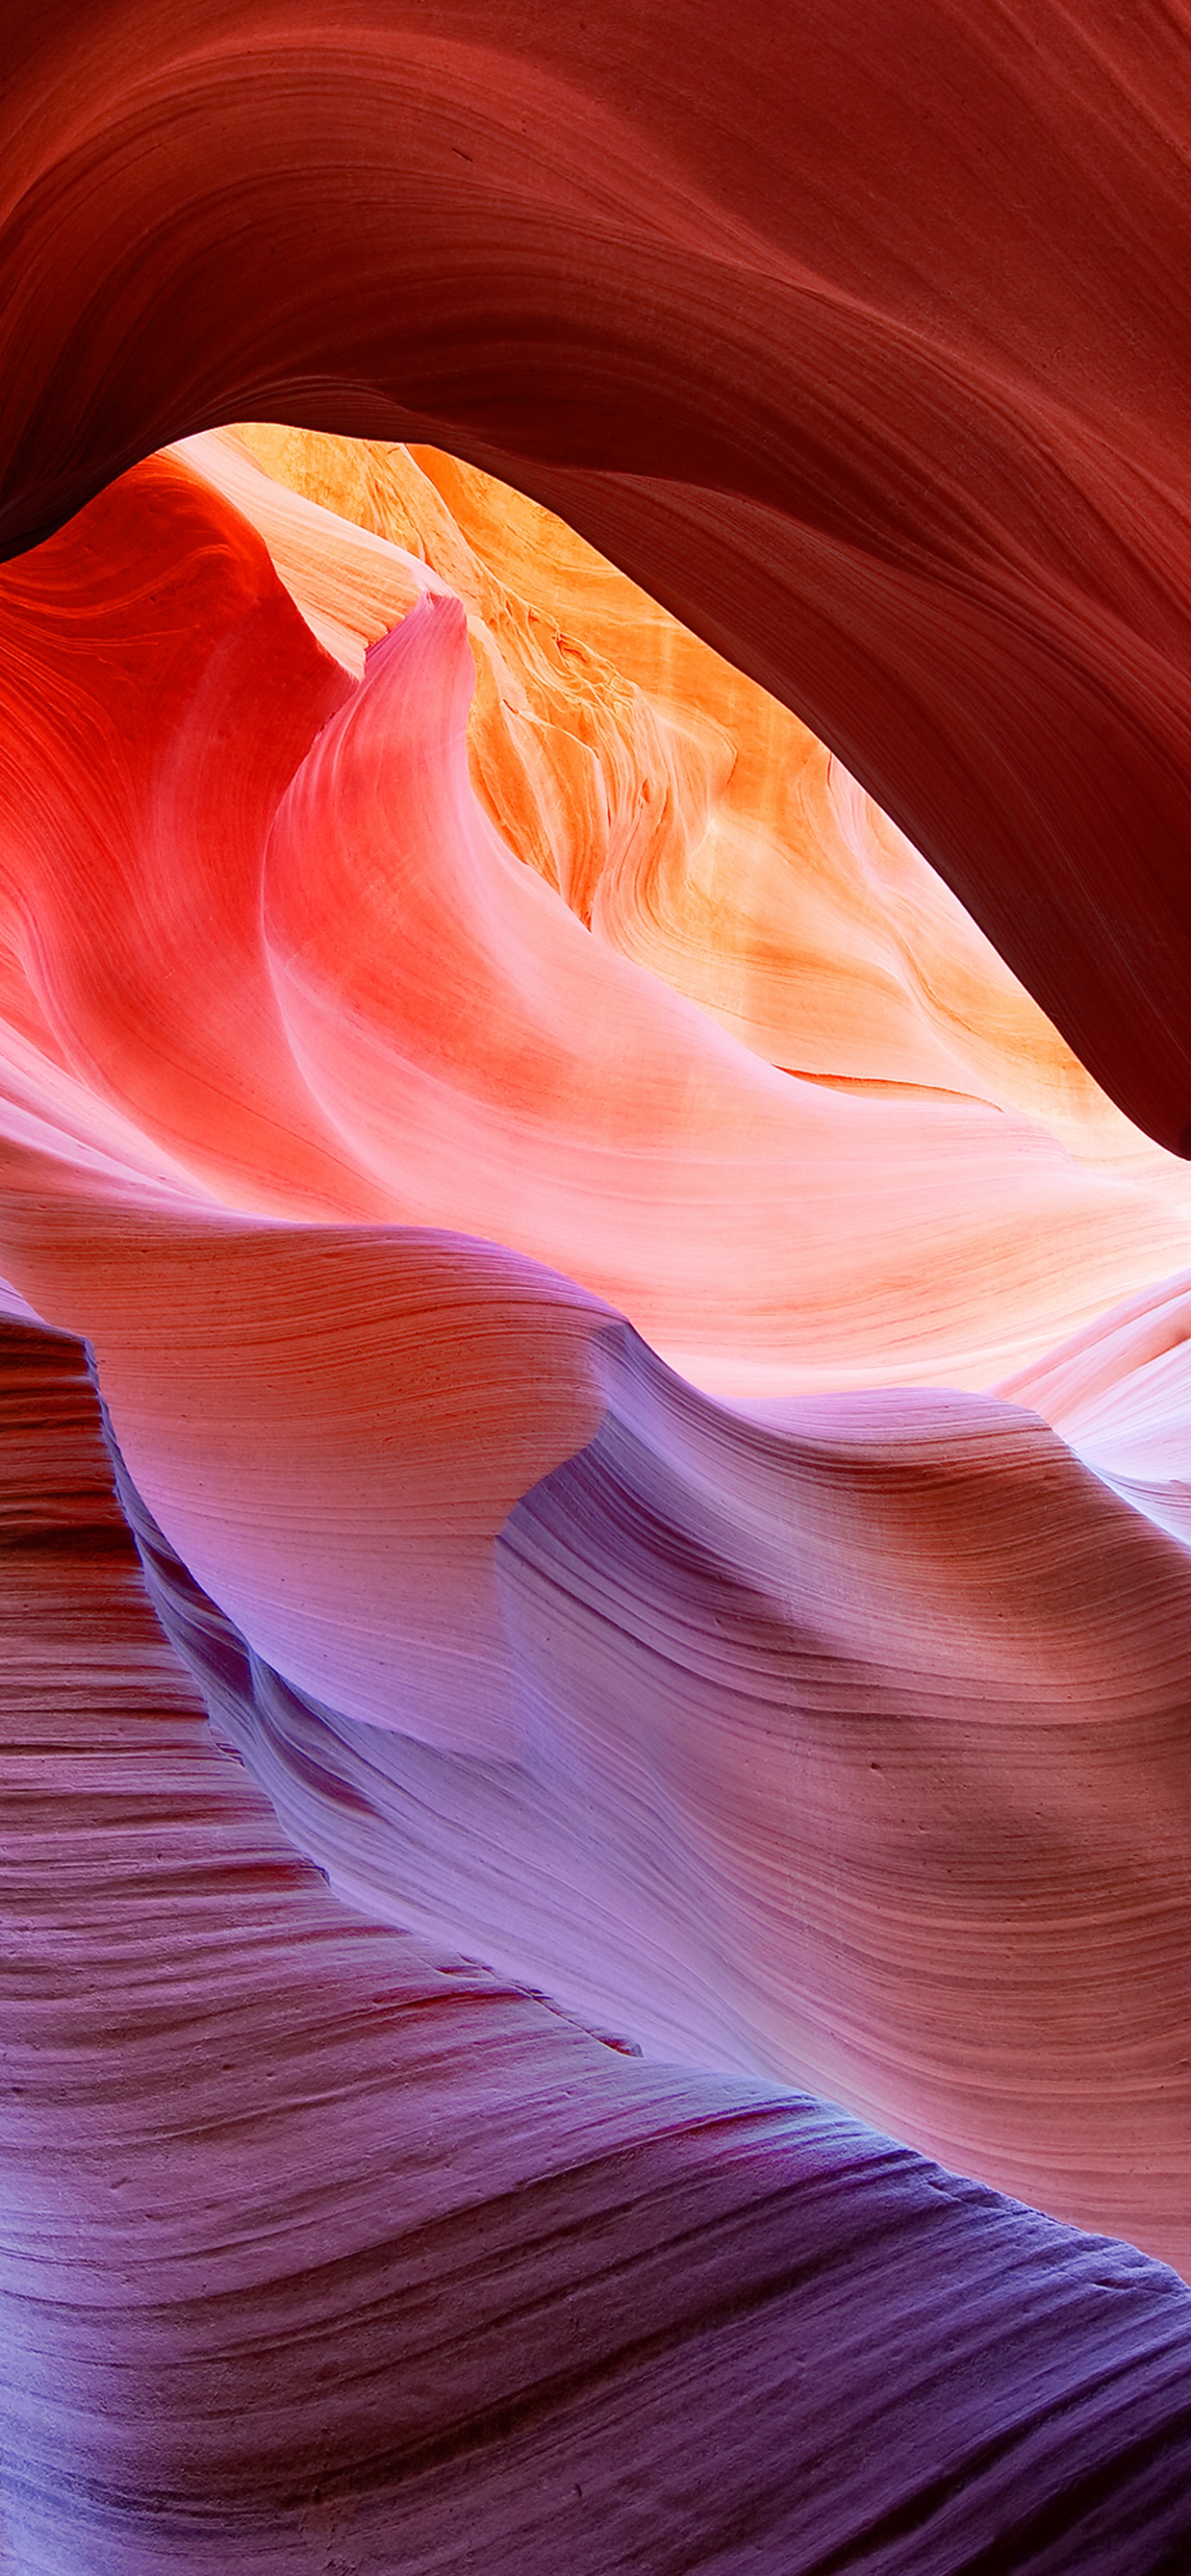 I visited the Windows 7 wallpaper at Antelope Canyon | Denver to Los  Angeles Road Trip Part 2 - YouTube